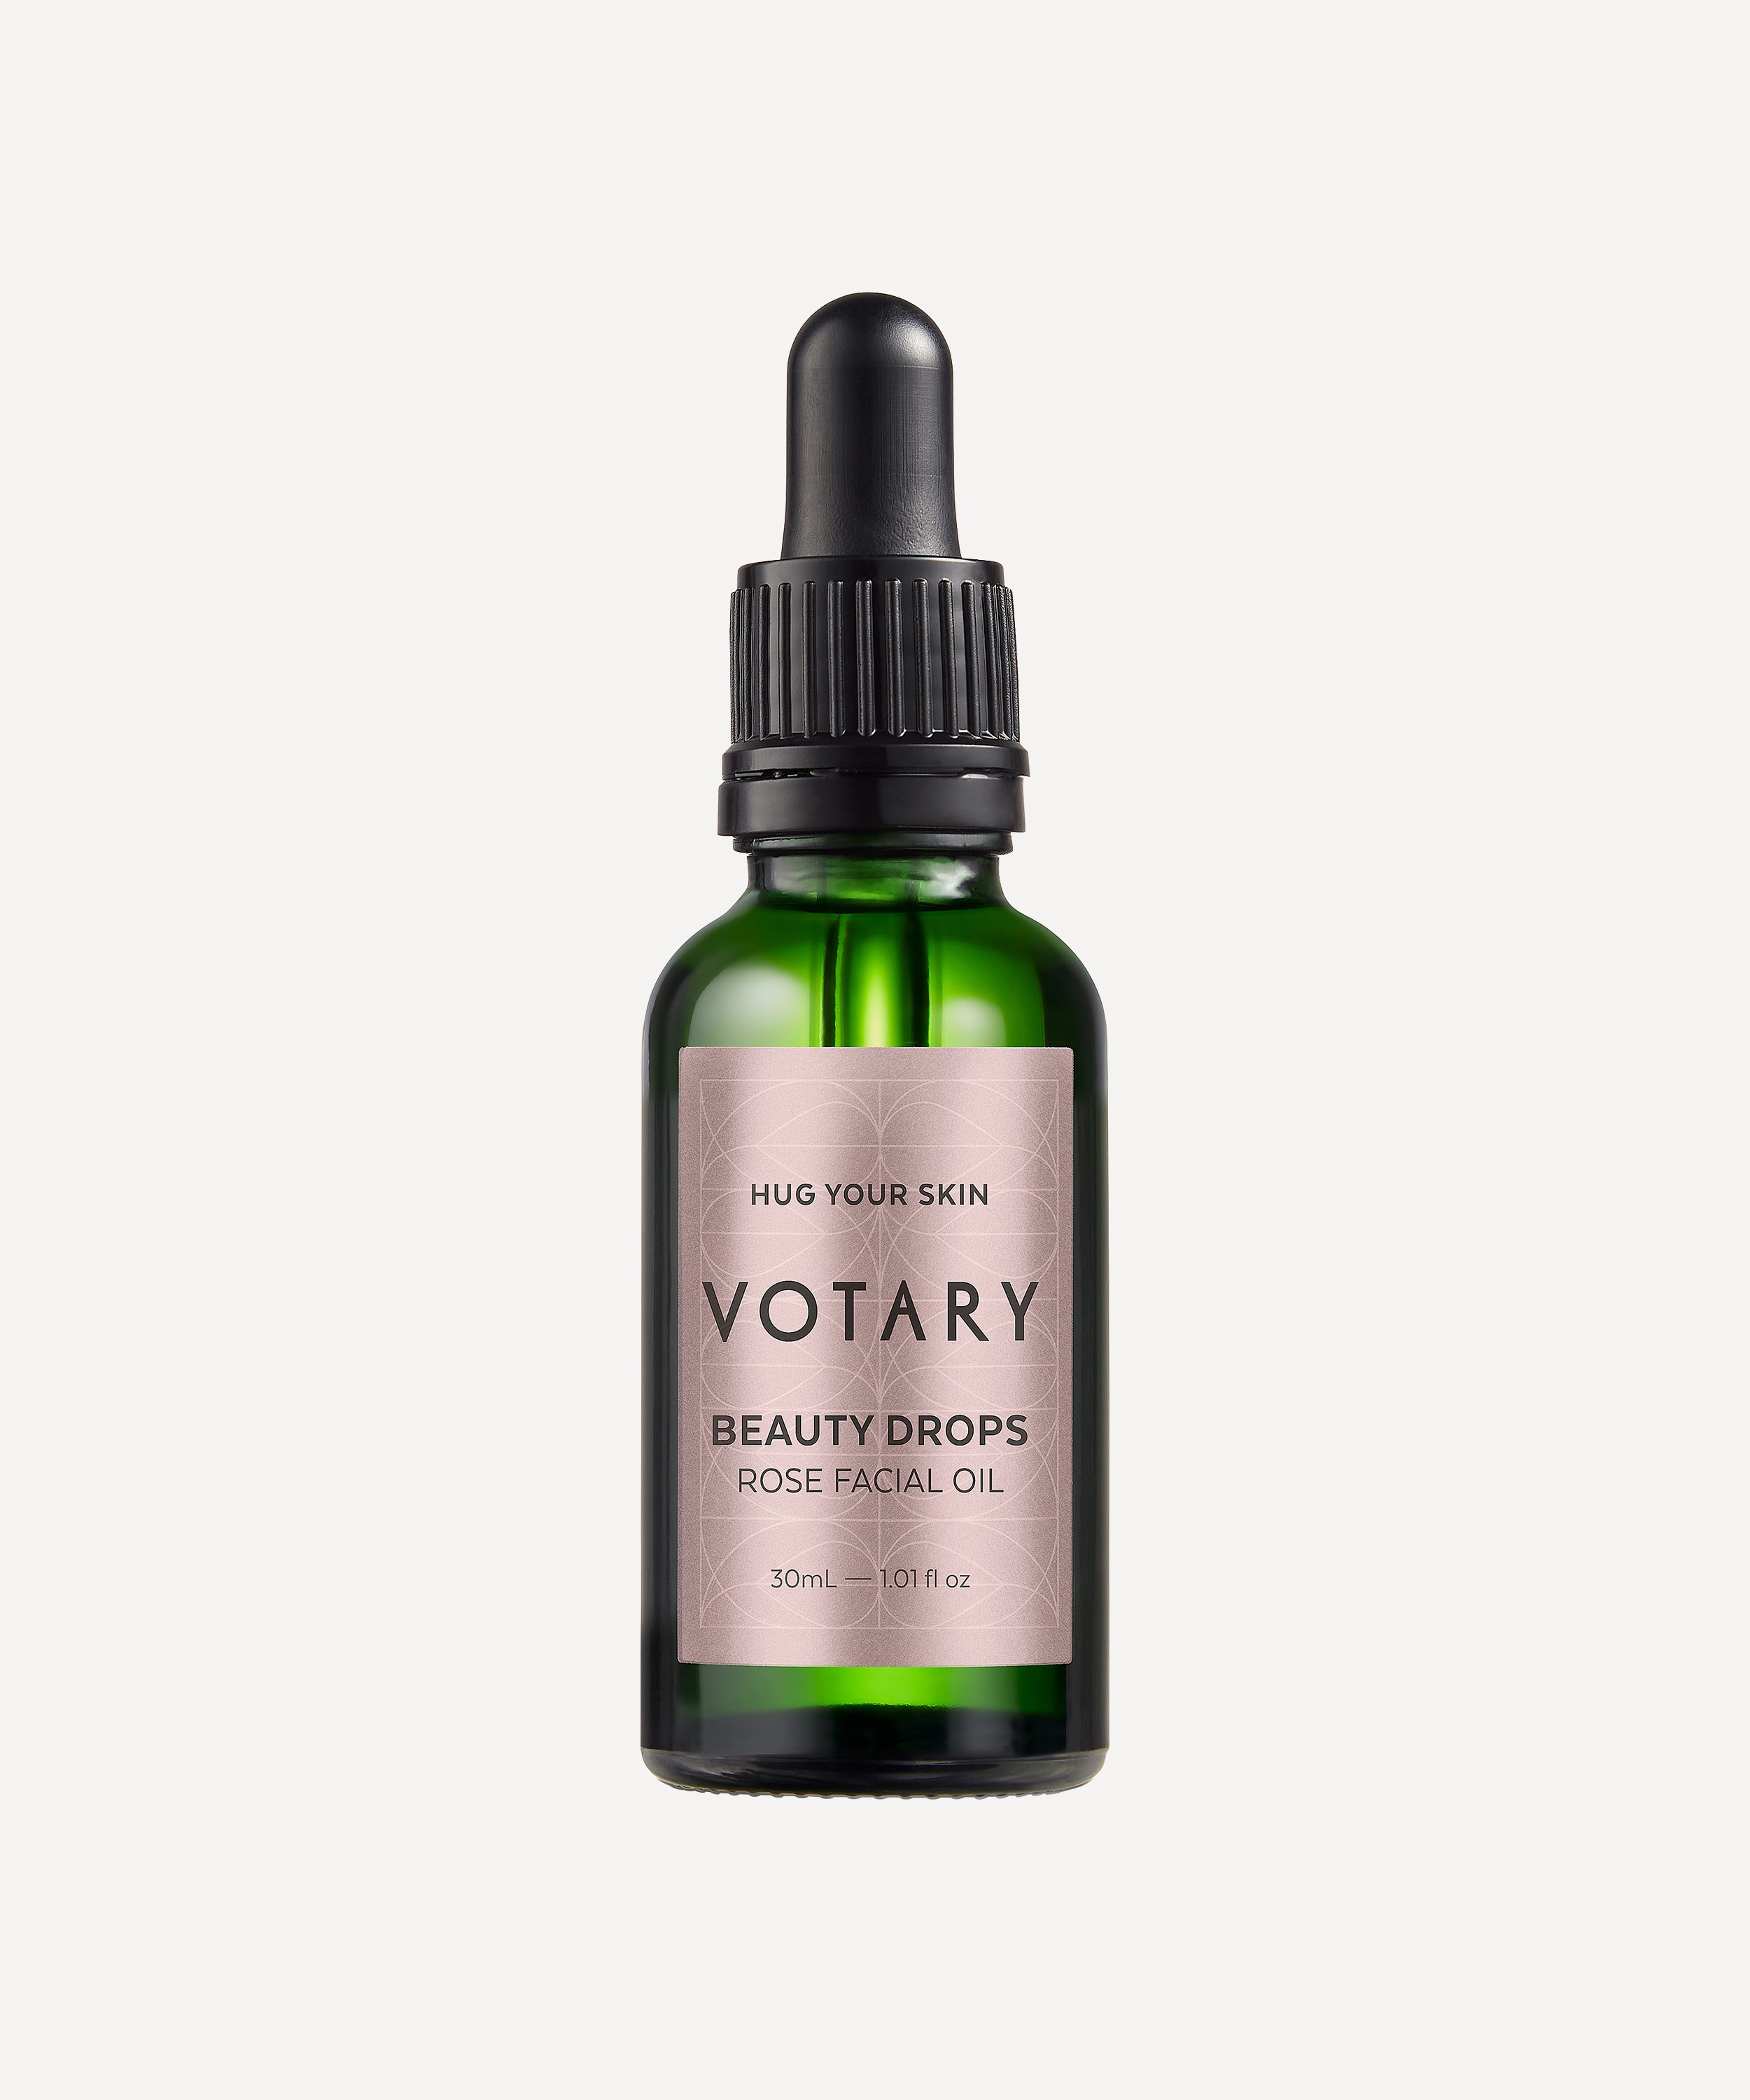 Votary - Beauty Drops Rose Facial Oil 30ml